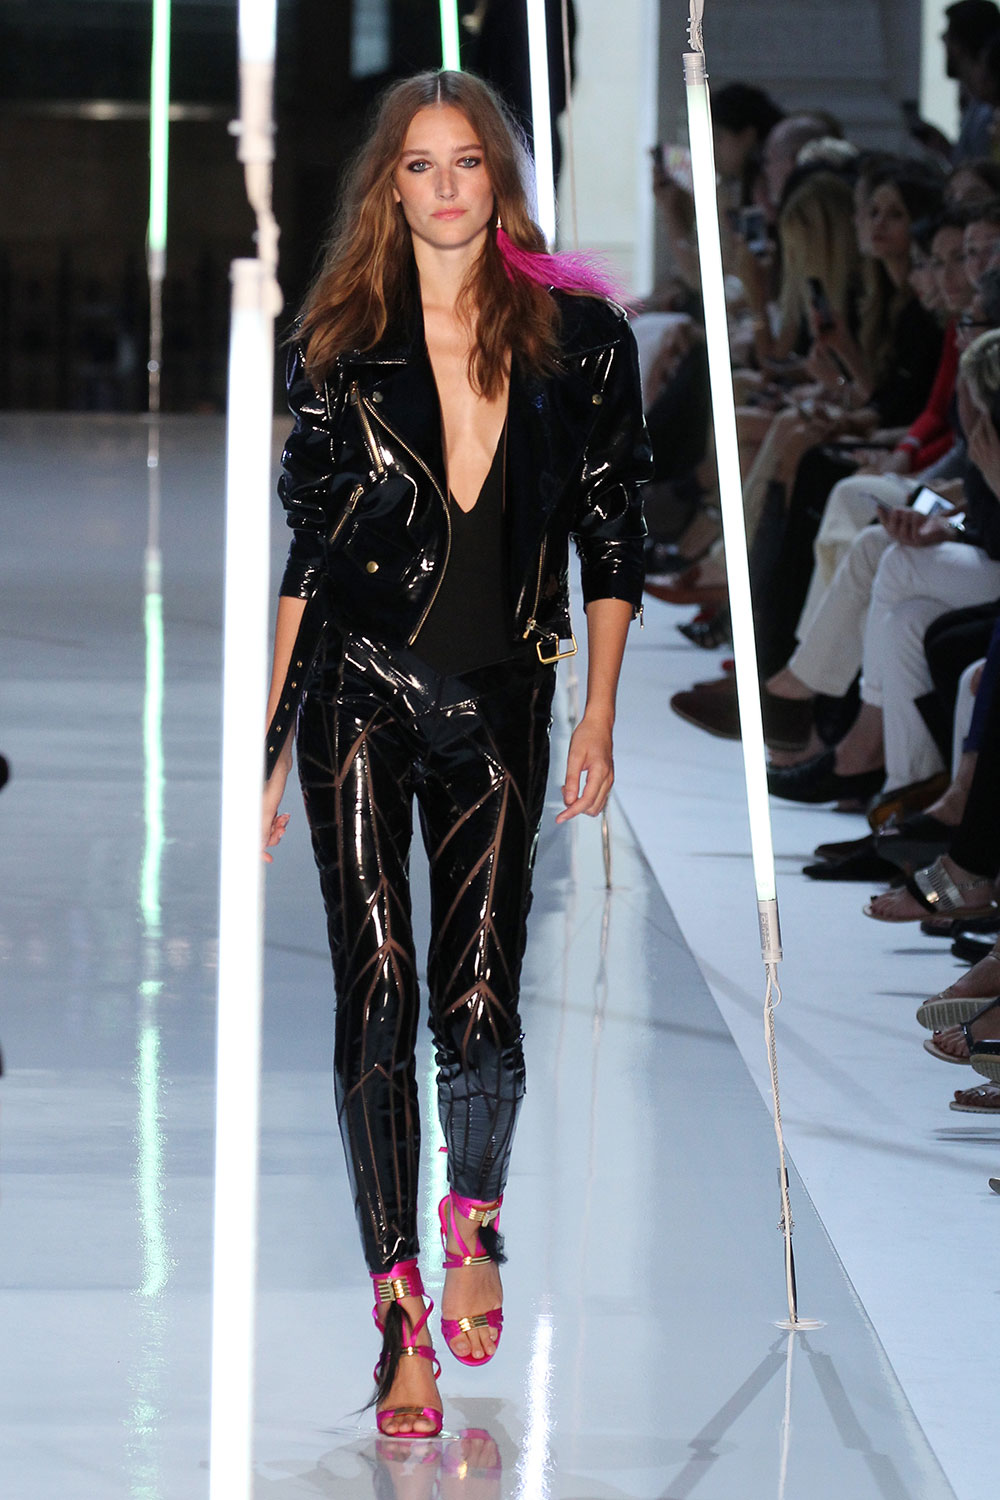 Look 6 from the Alexandre Vauthier show at Paris Fashion Week Haute Couture FW 2015/2016. Photo / Getty Images